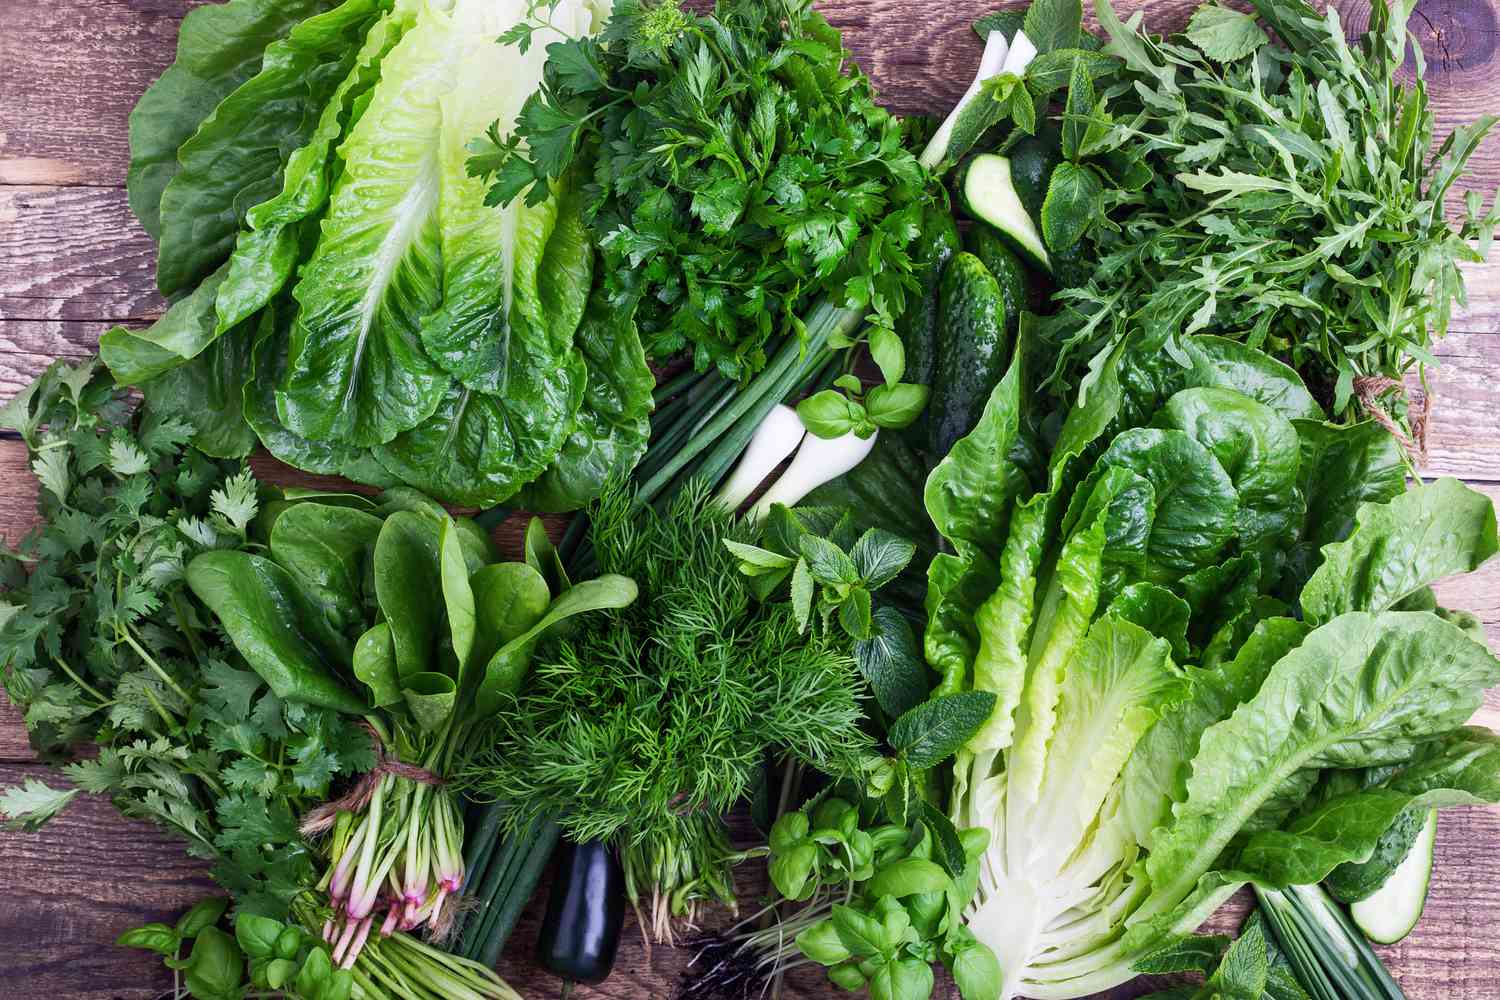 Freshness and Nutritional Value: The Advantages of Organic Leafy Greens